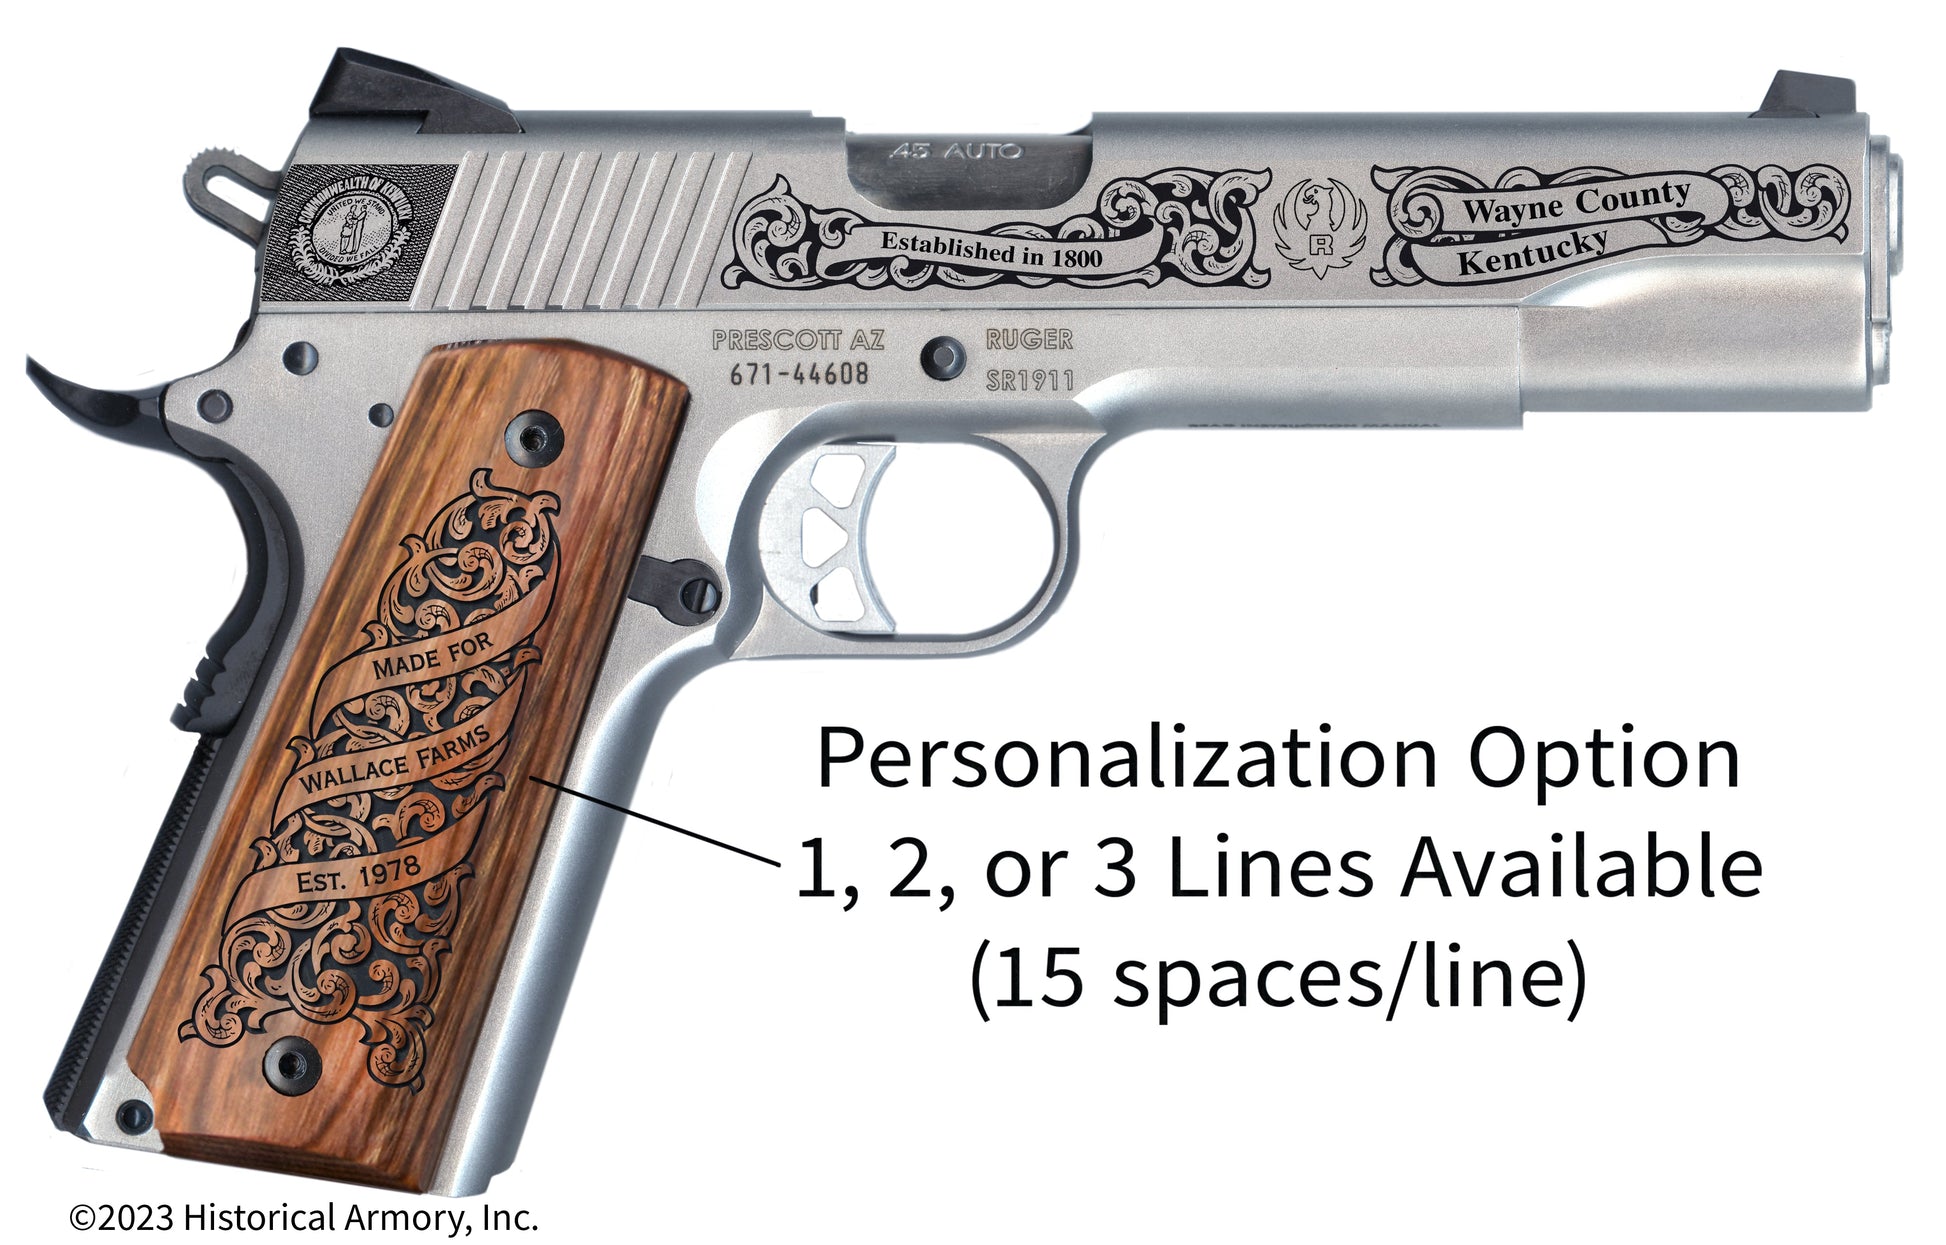 Wayne County Kentucky Personalized Engraved .45 Auto Ruger 1911